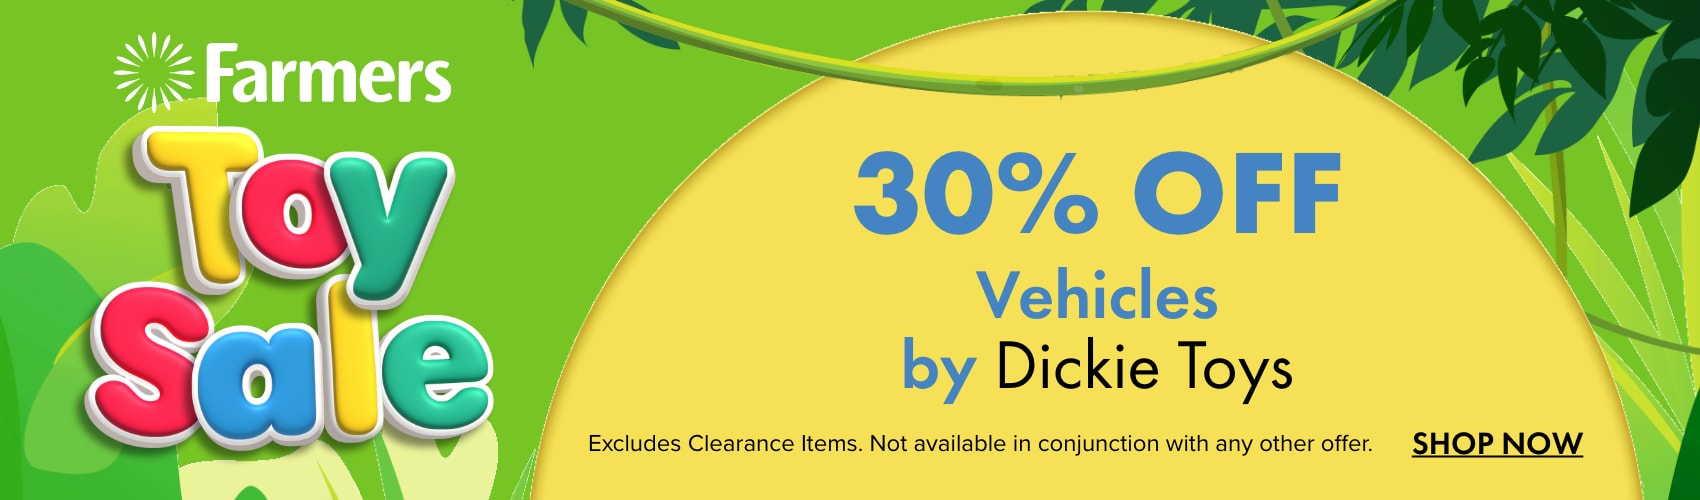 30% OFF Vehicles by Dickie Toys